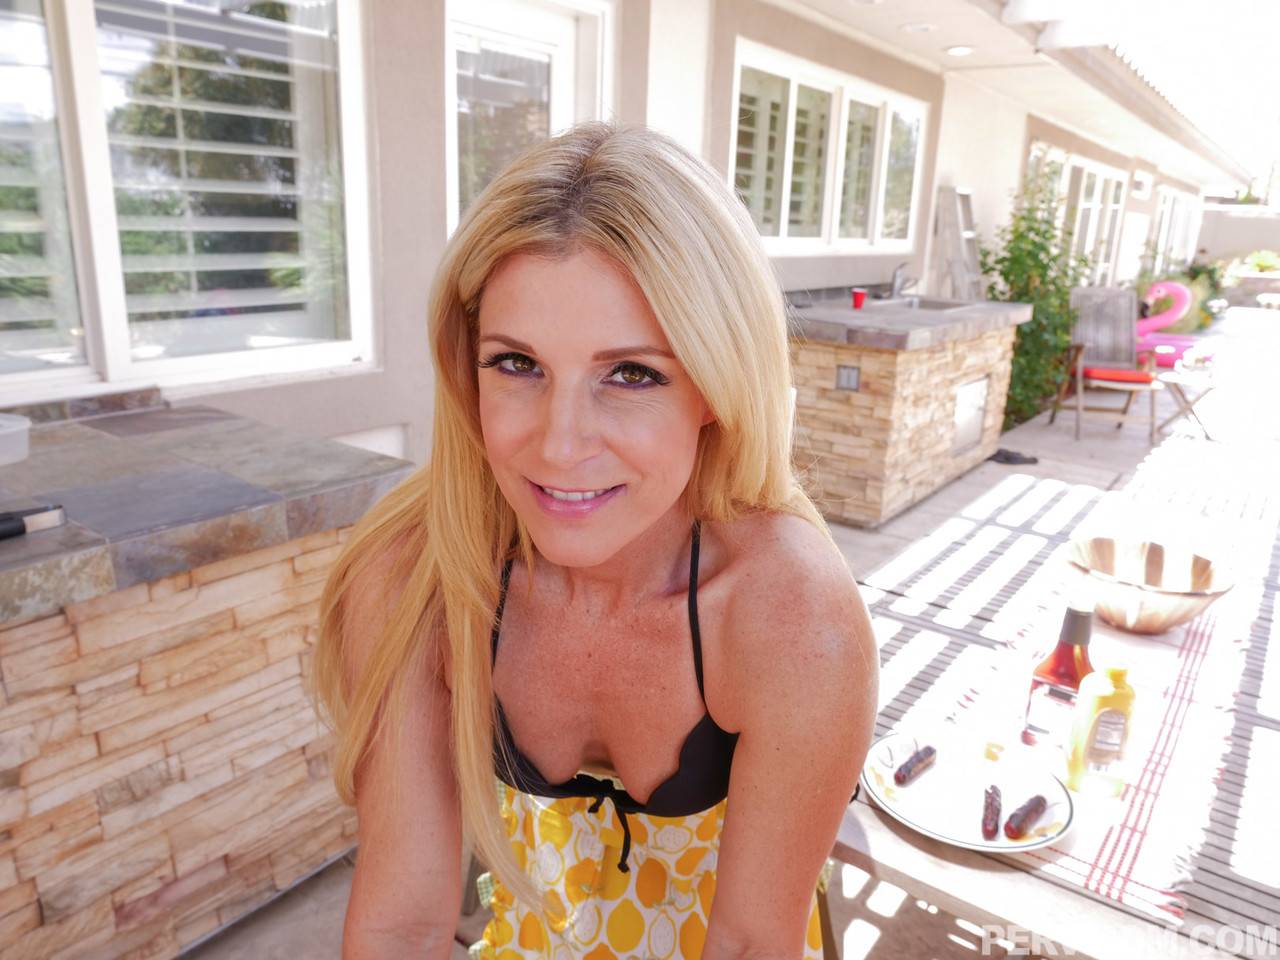 Hot blonde mom gets hungry for more than BBQ & eats stepson's cum on the patio porn photo #423285847 | Perv Mom Pics, India Summer, Cougar, mobile porn